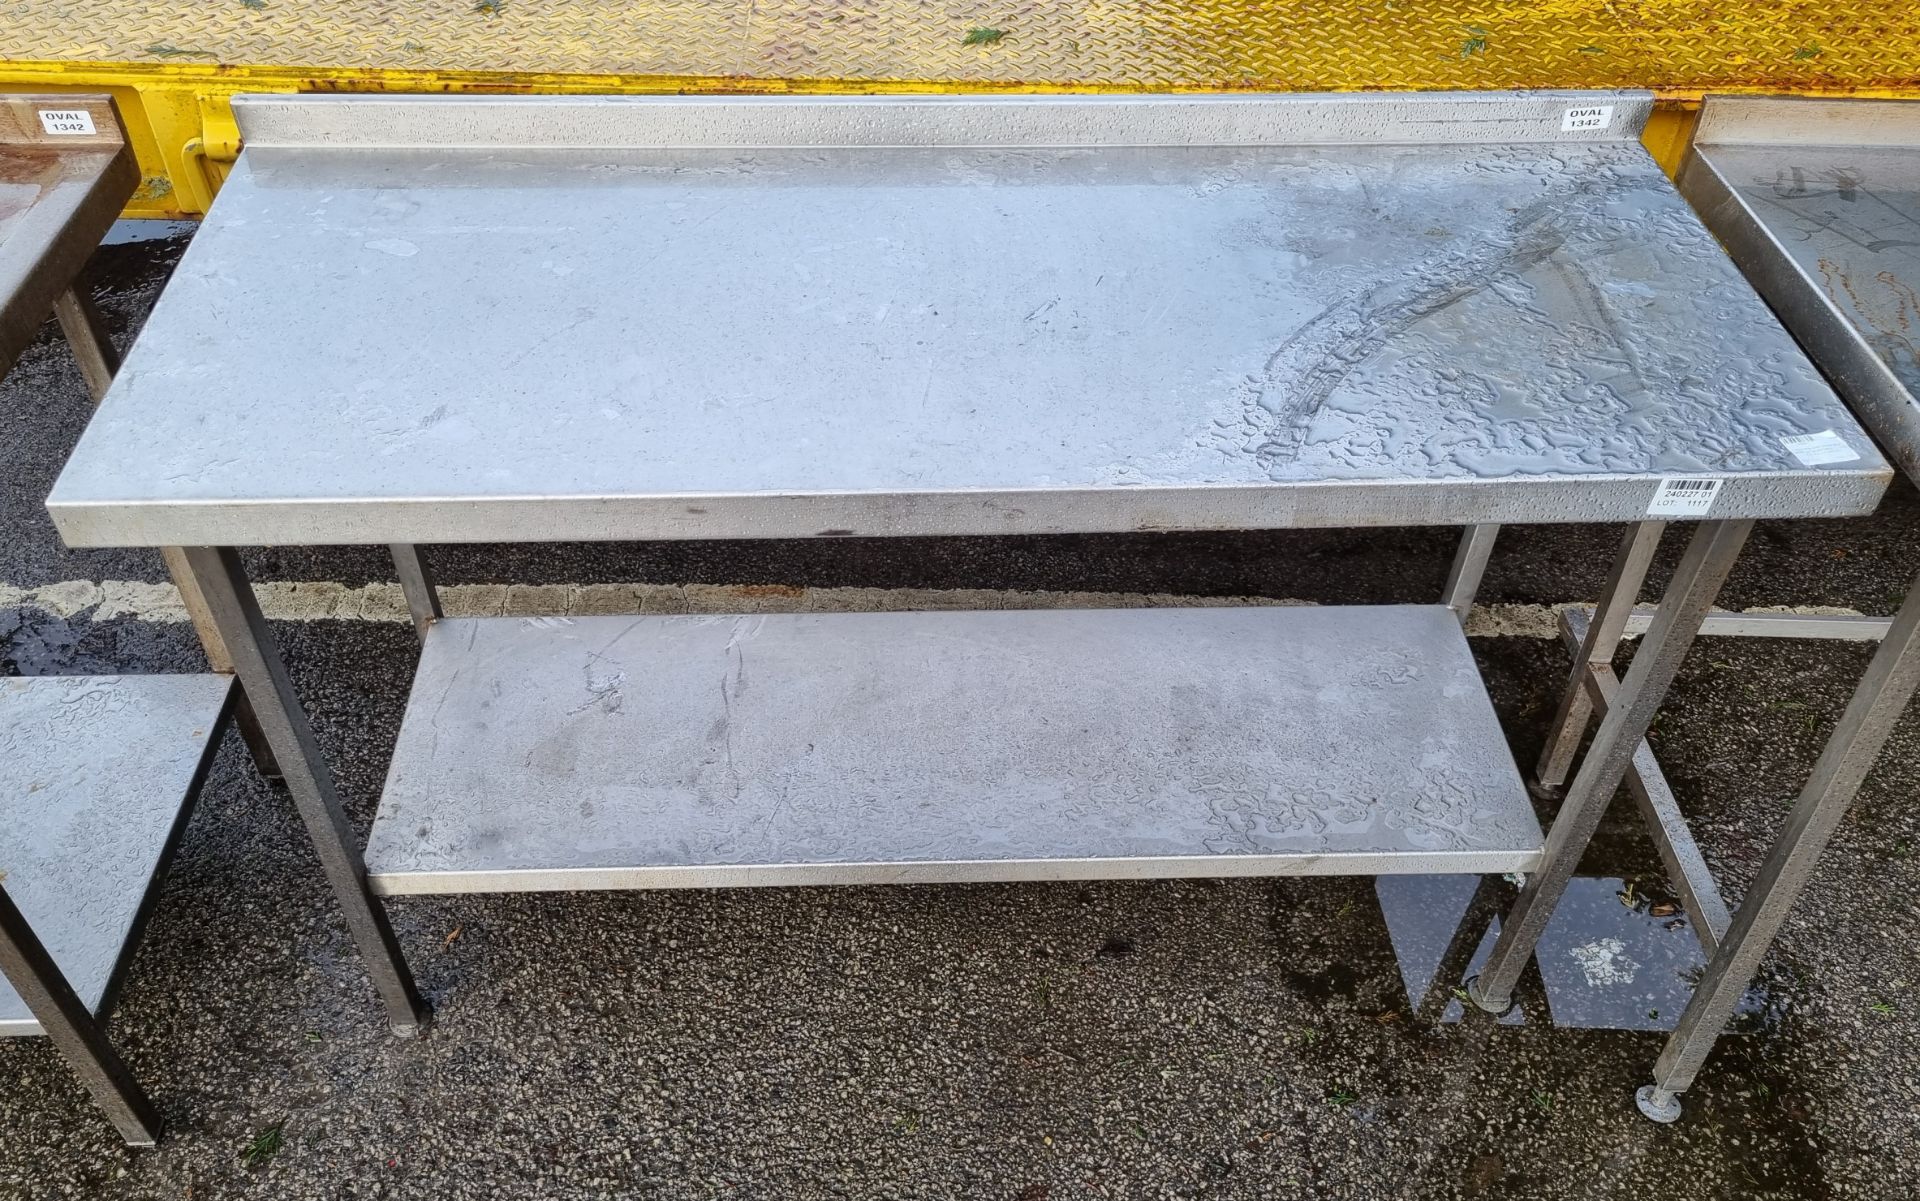 Stainless steel preparation table with splashback - L 1500 x W 600 x H 940mm - Image 2 of 3